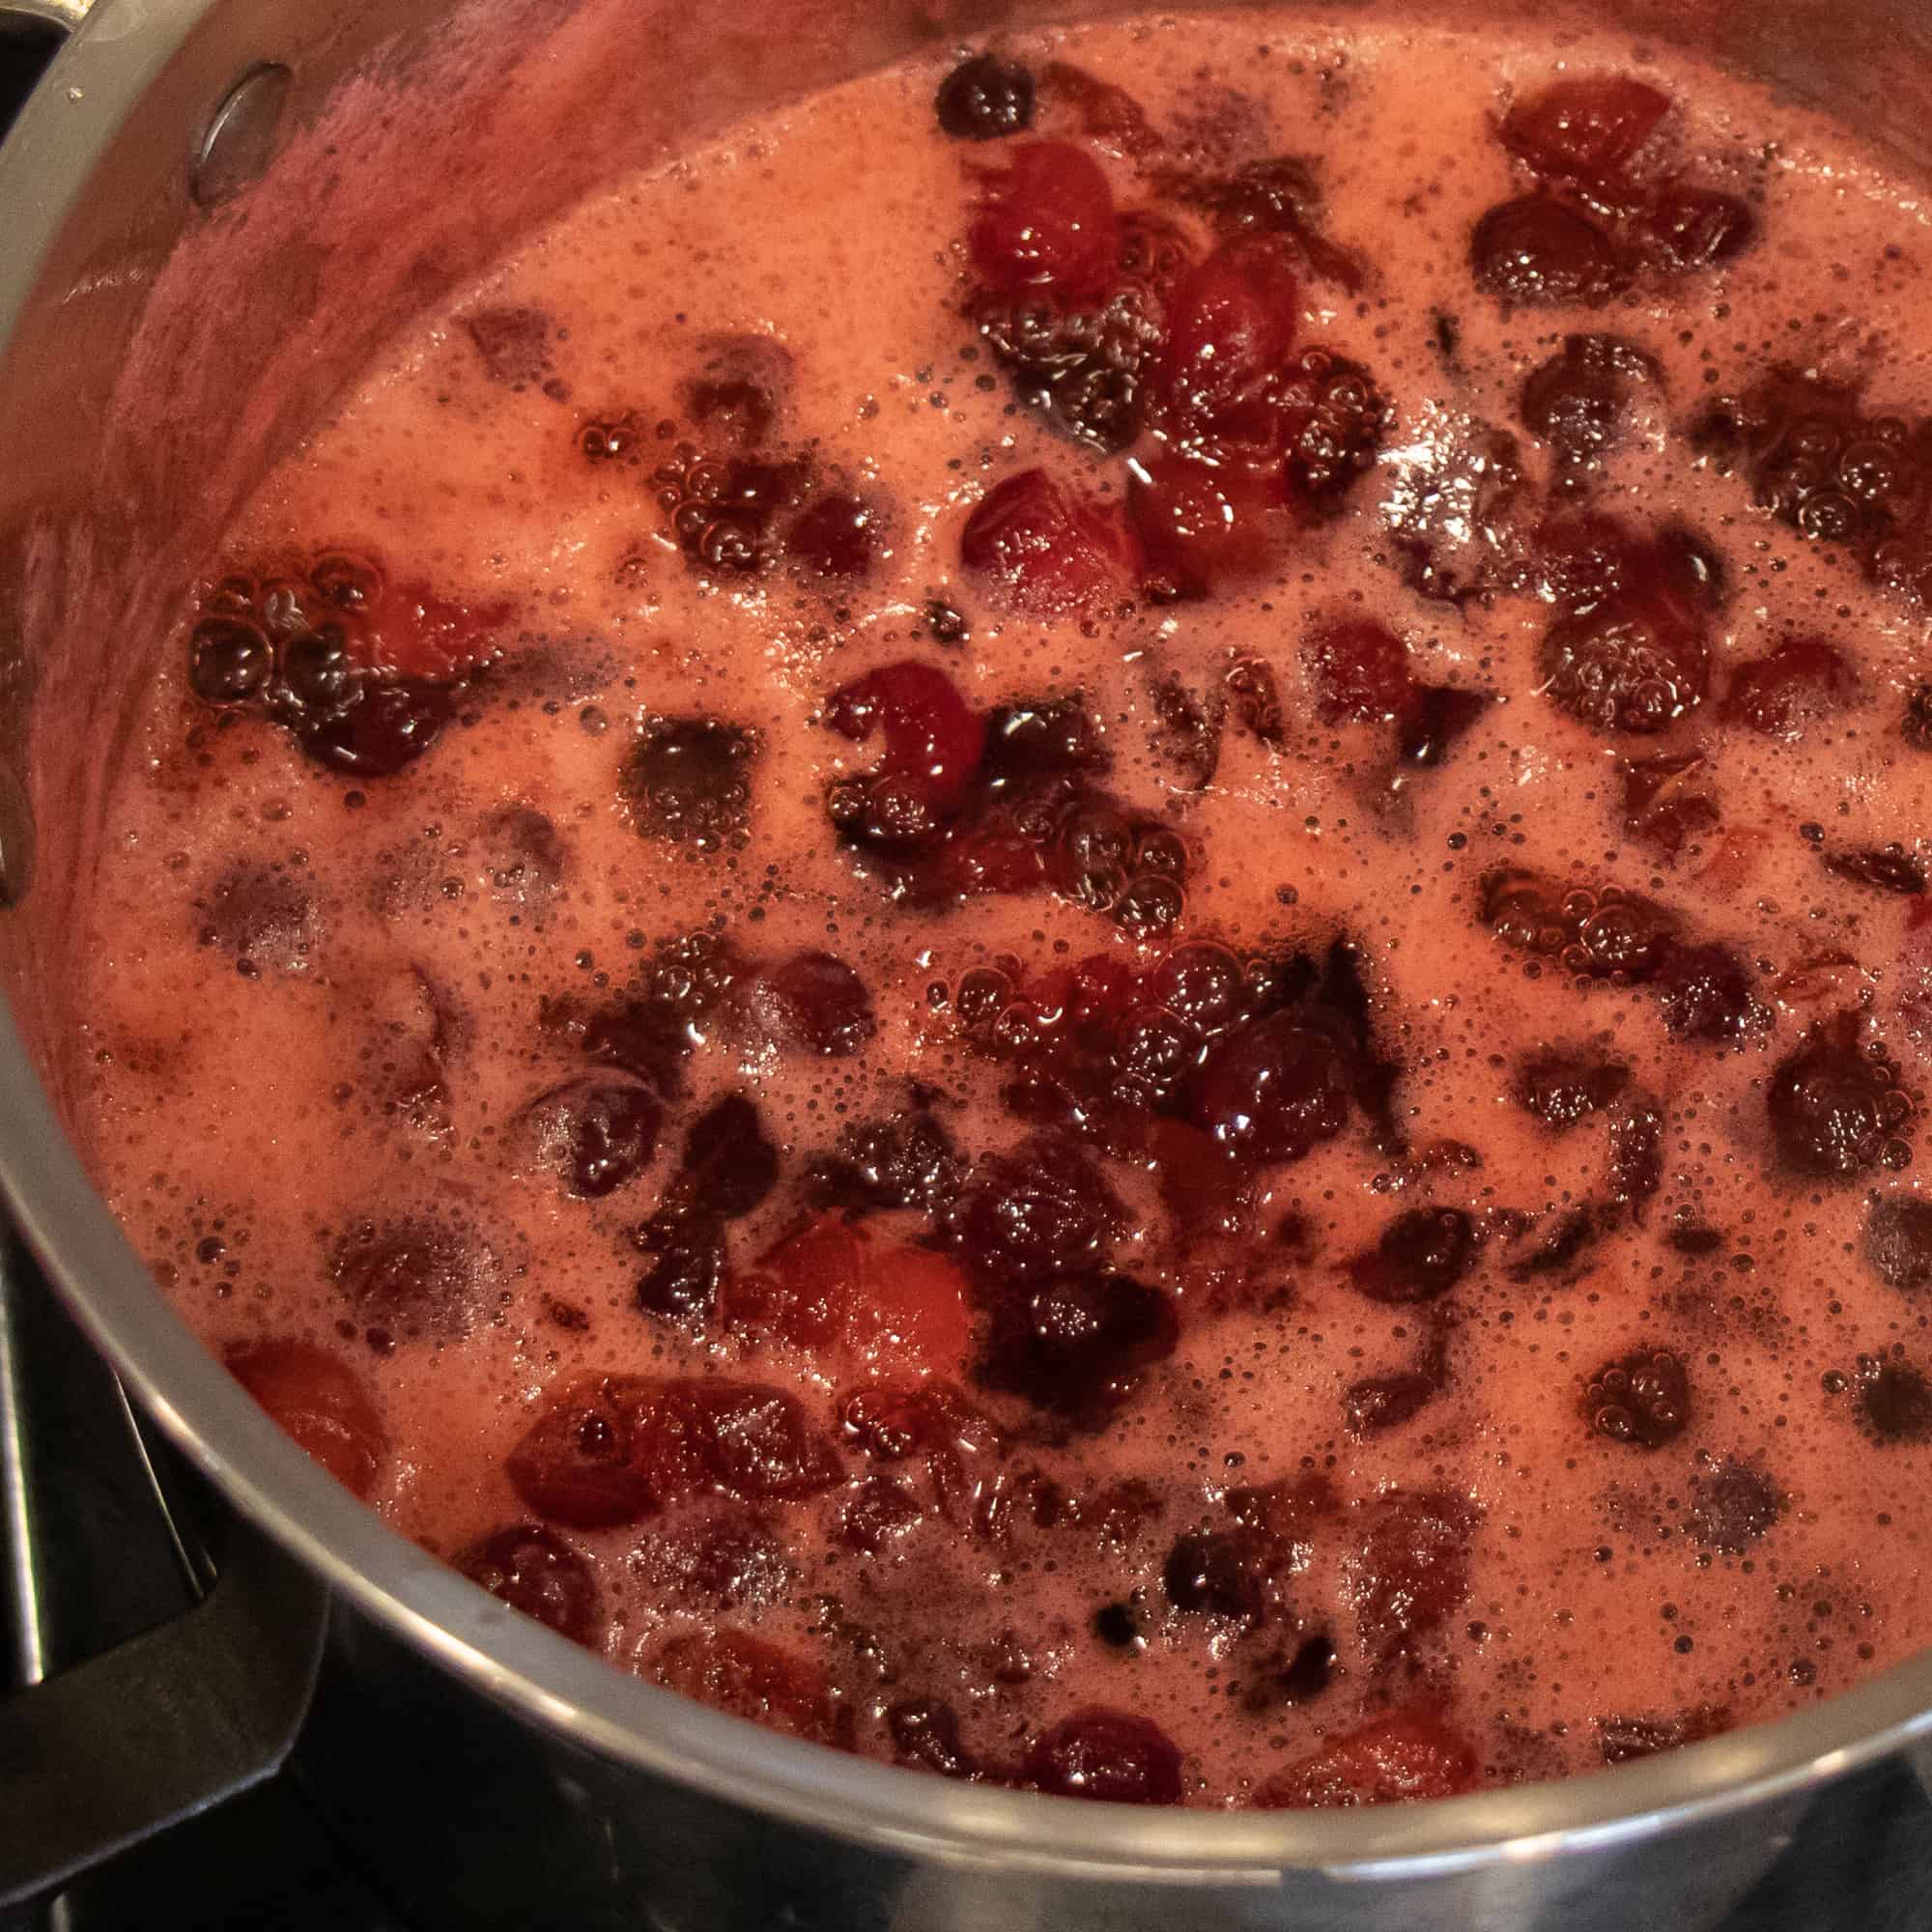 Turn off the heat and let the cranberries cool